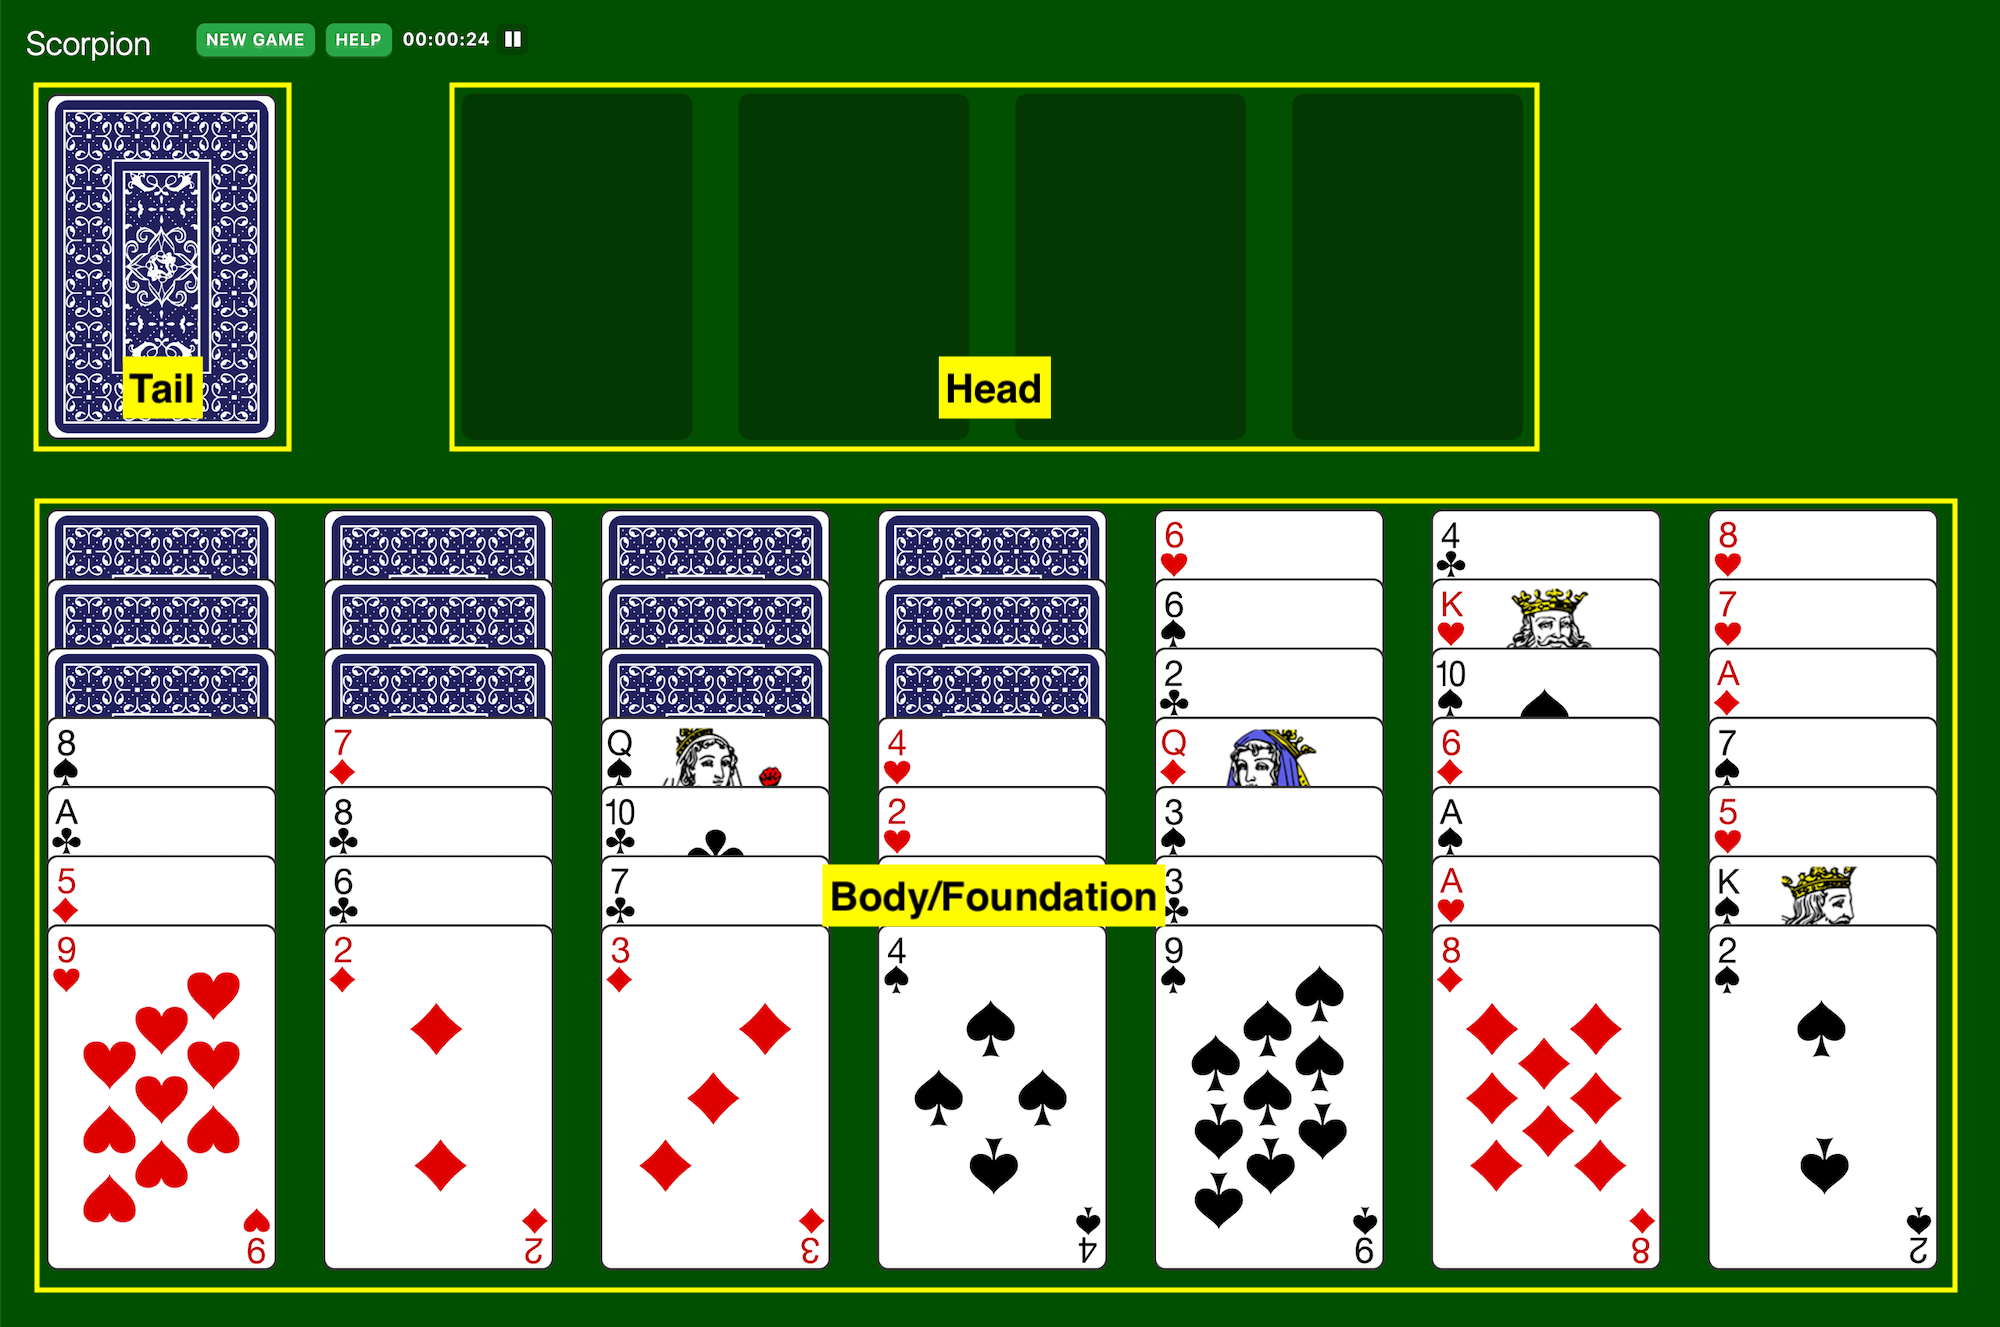 strategy for playing scorpion solitaire